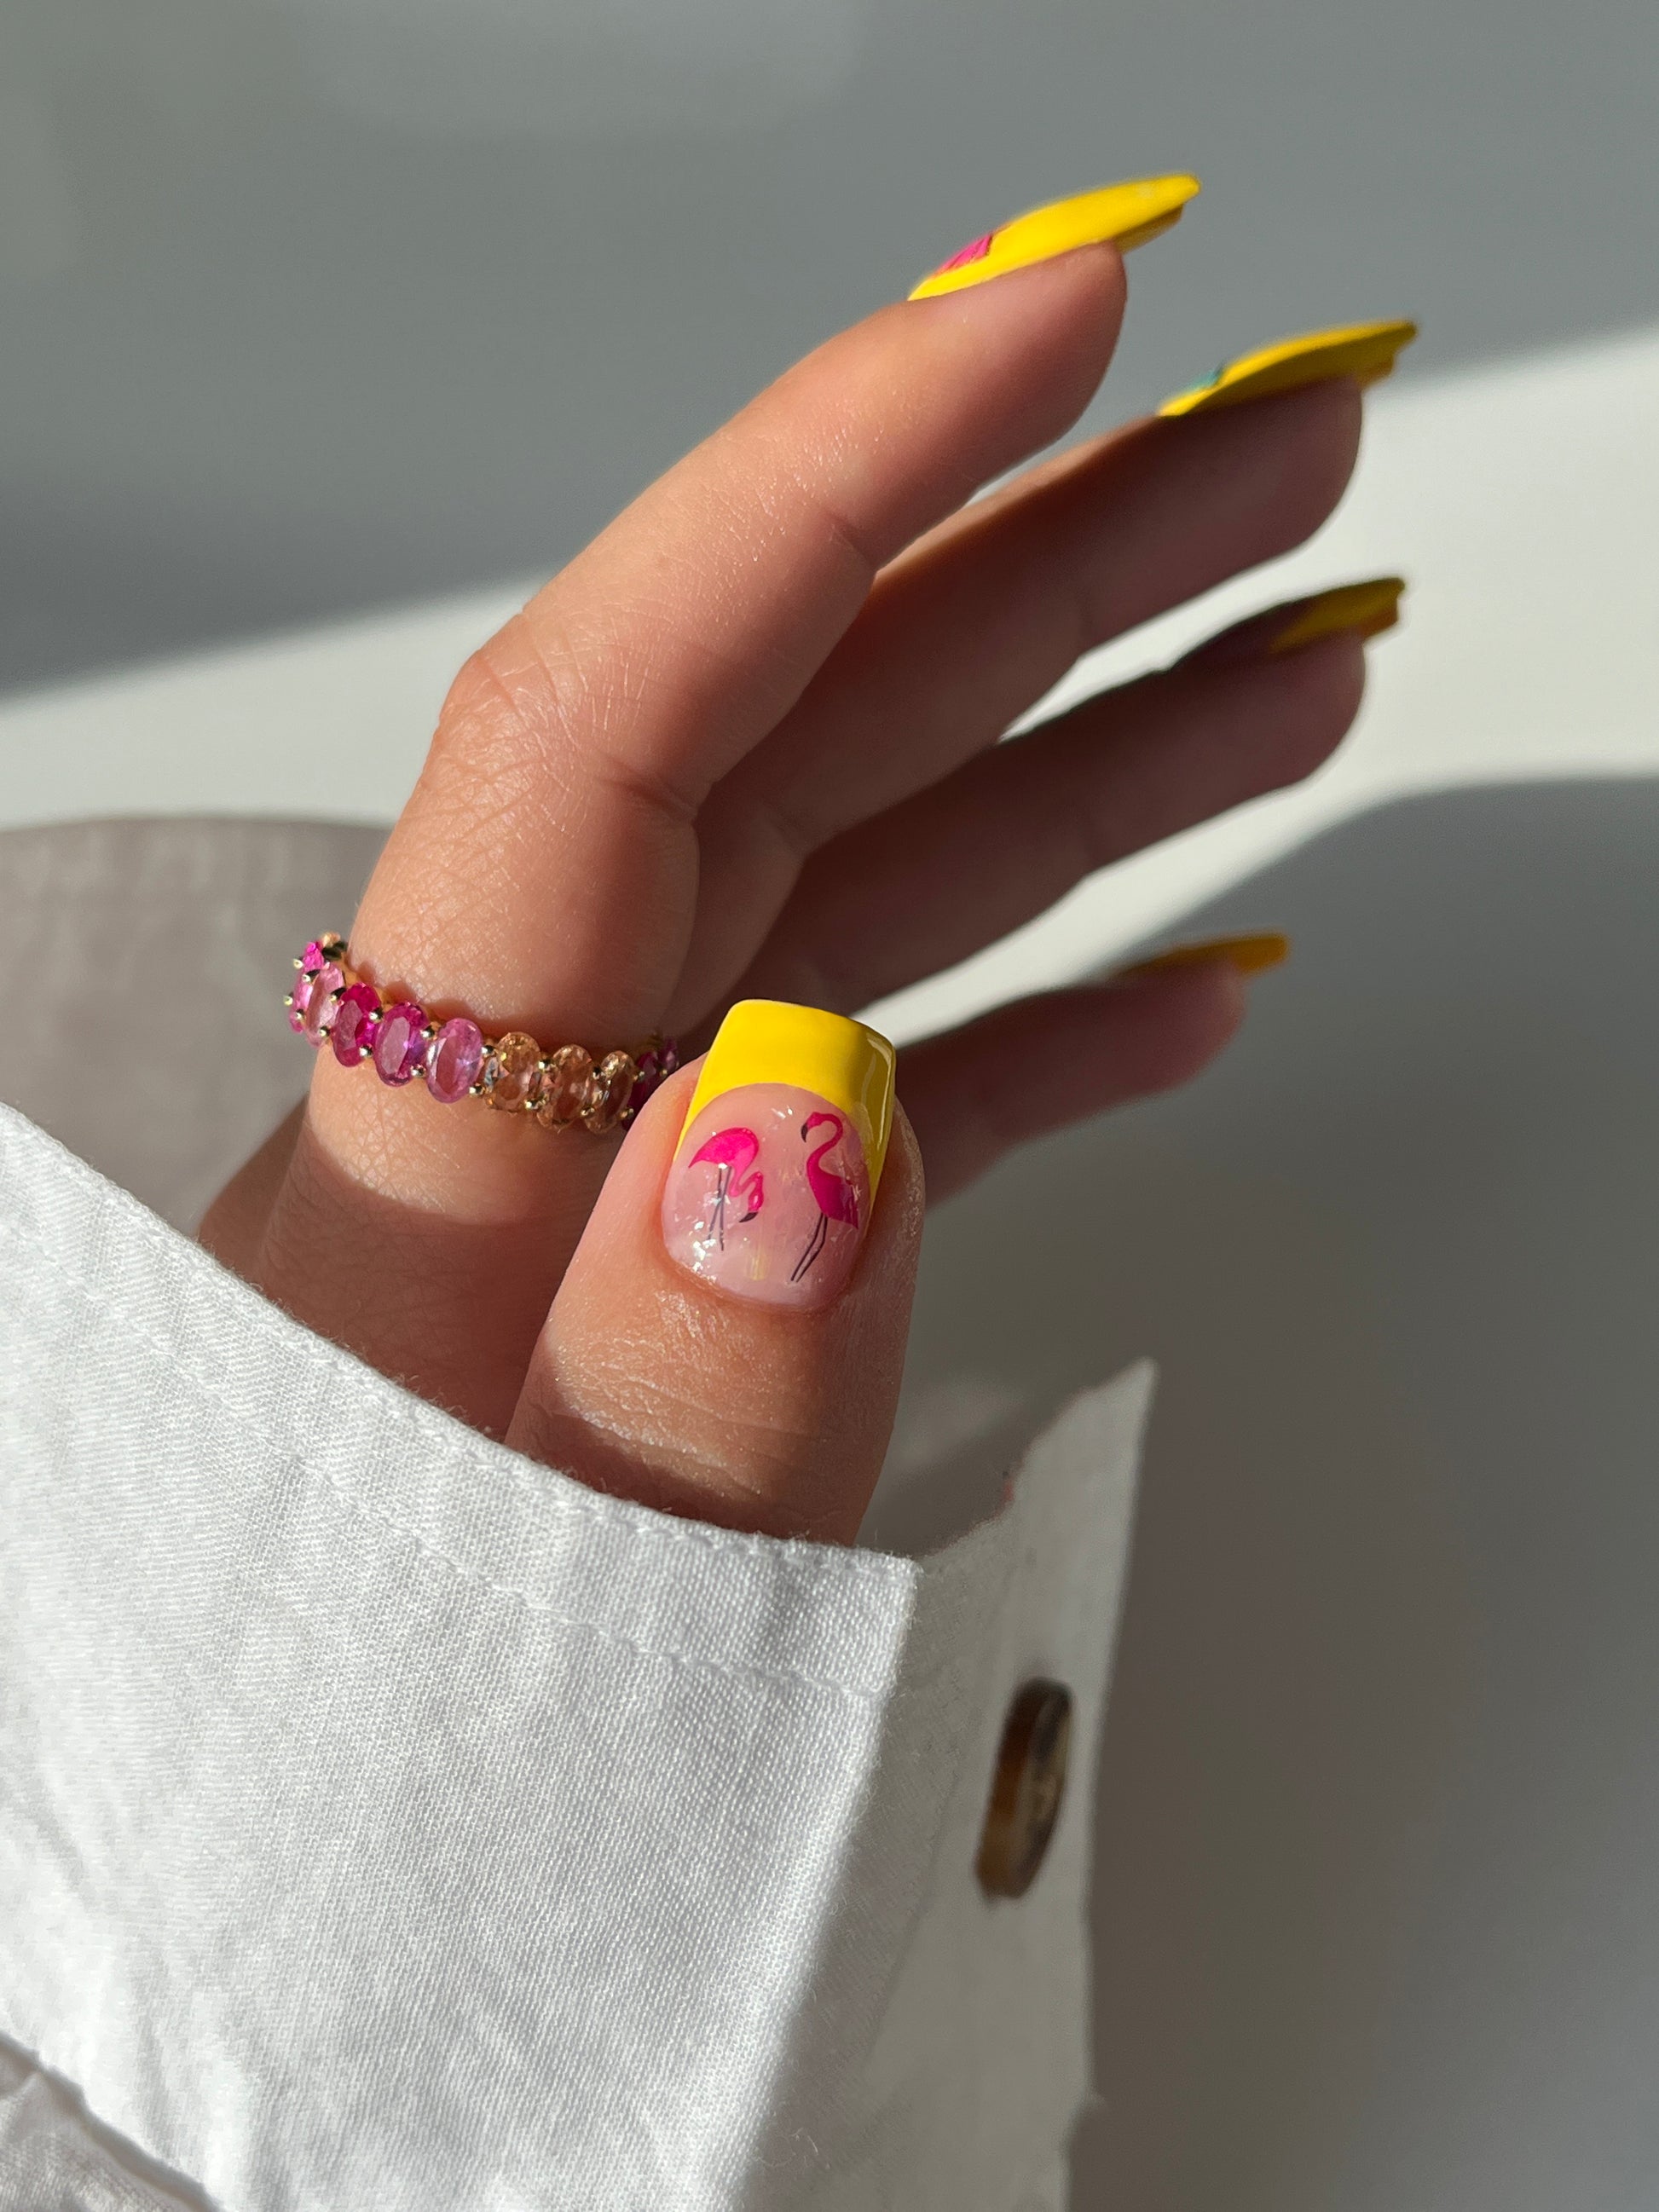 Beach themed mani with yellow tips